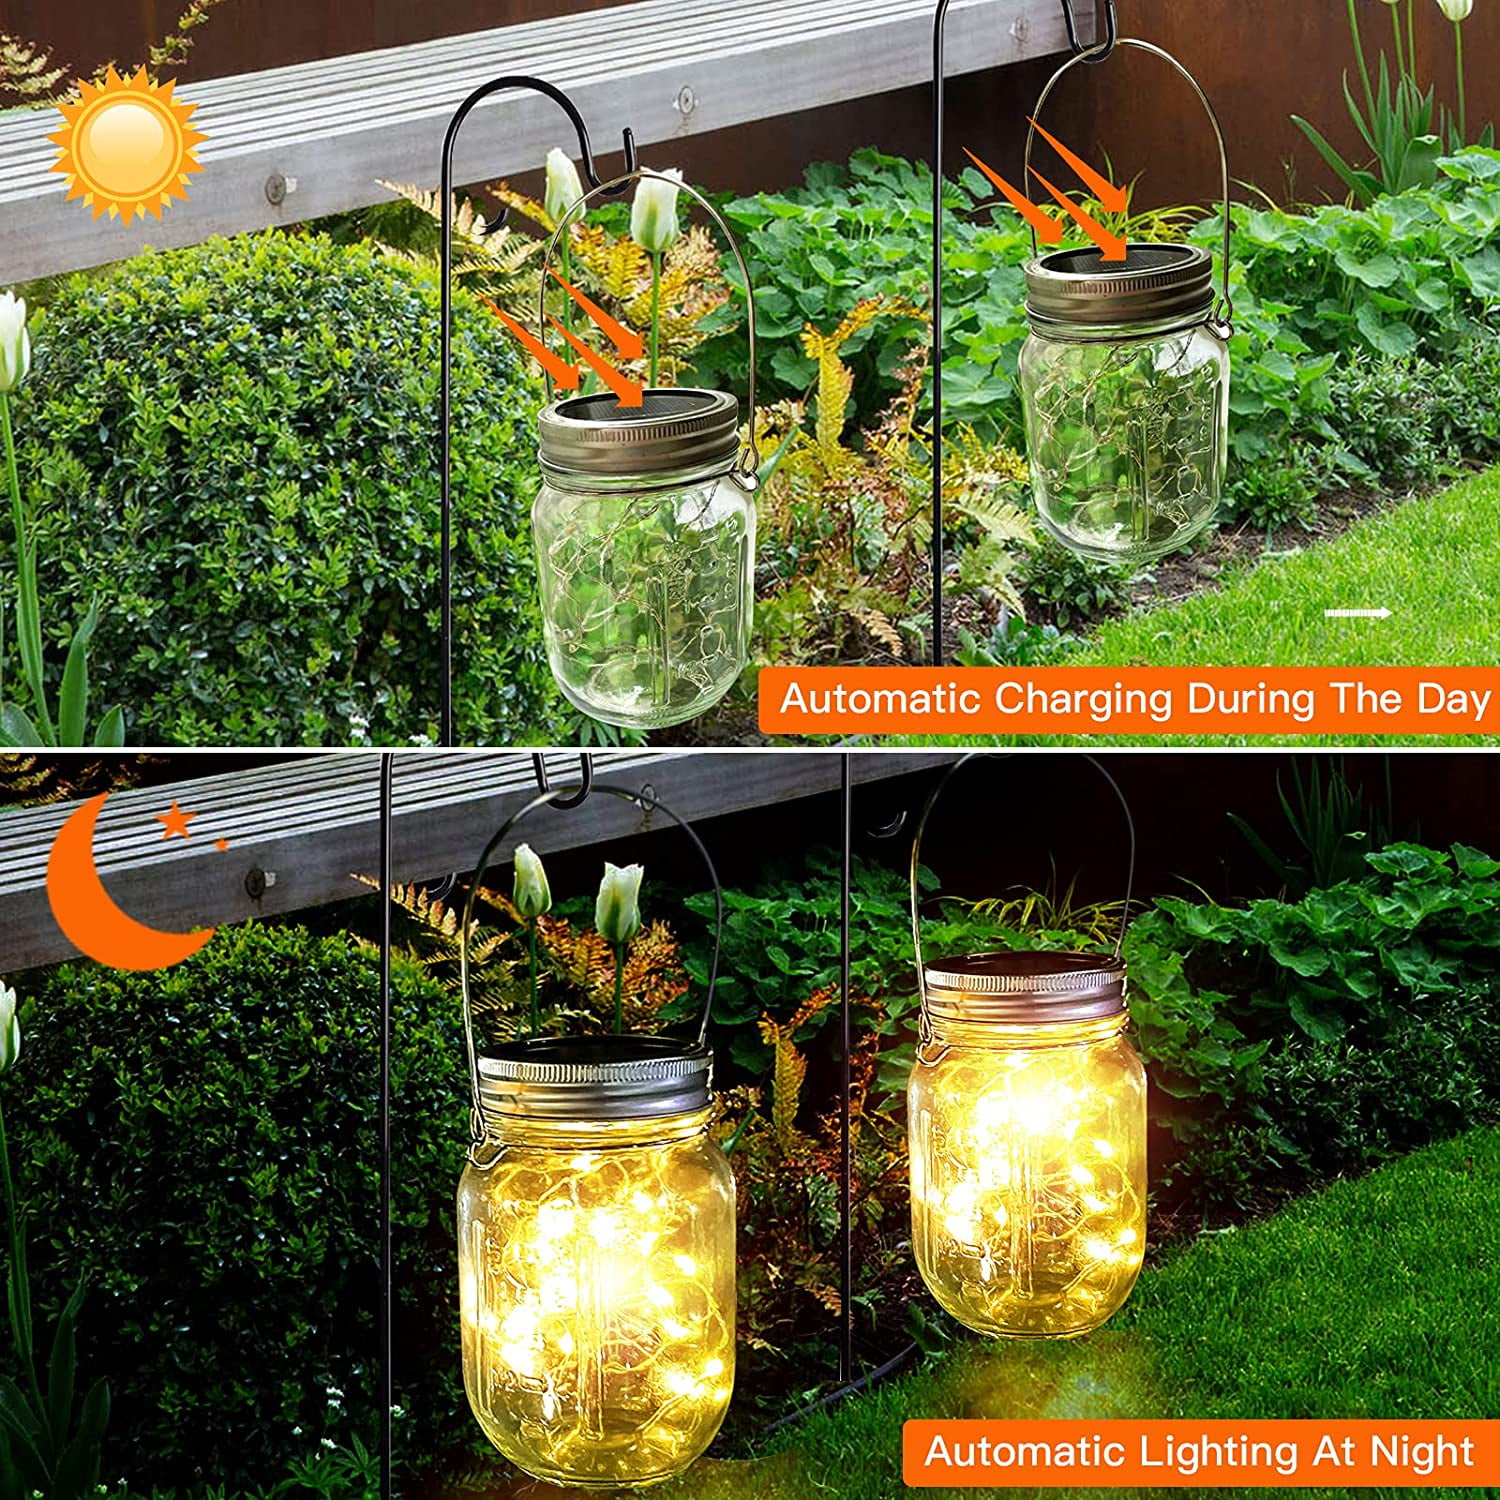 3”D x 5.5”H LED Green Indoor/Outdoor Frosted Mason Jar - Set of 3